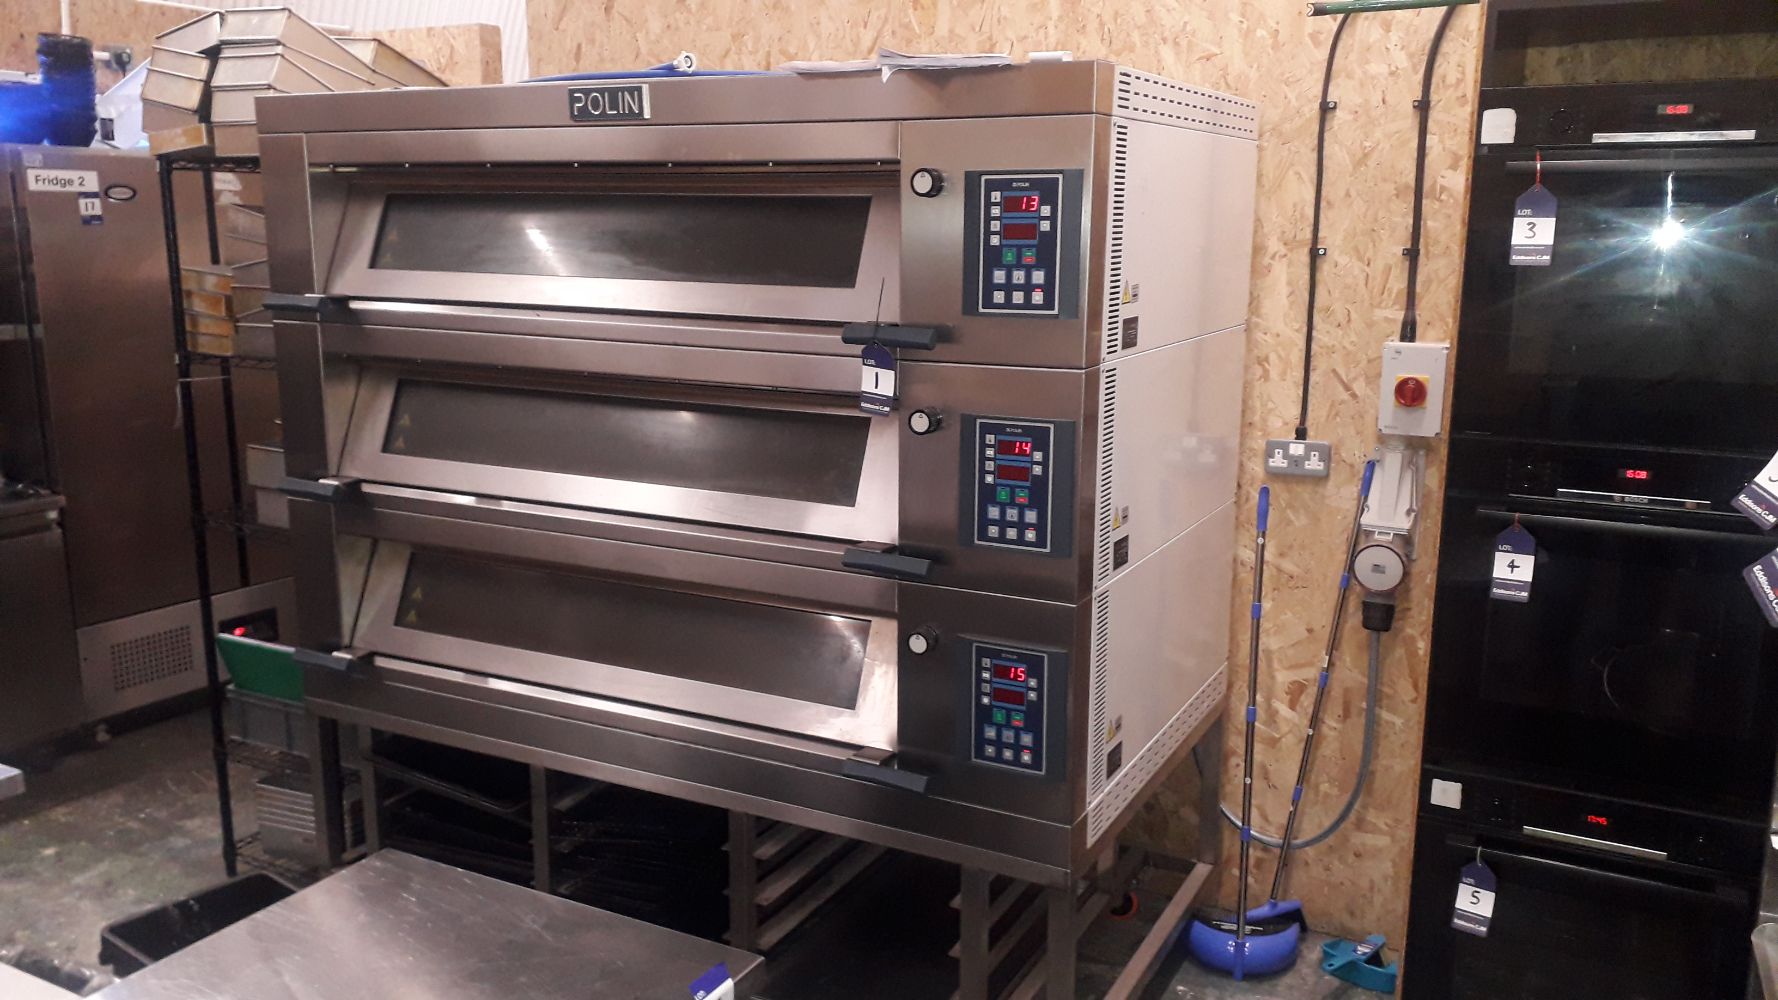 Good quality catering kit to include 2022 Polin Deck Oven, Foster Blast Chiller, Robot Coupe Prep Machines, CookTek Induction Hobs etc.